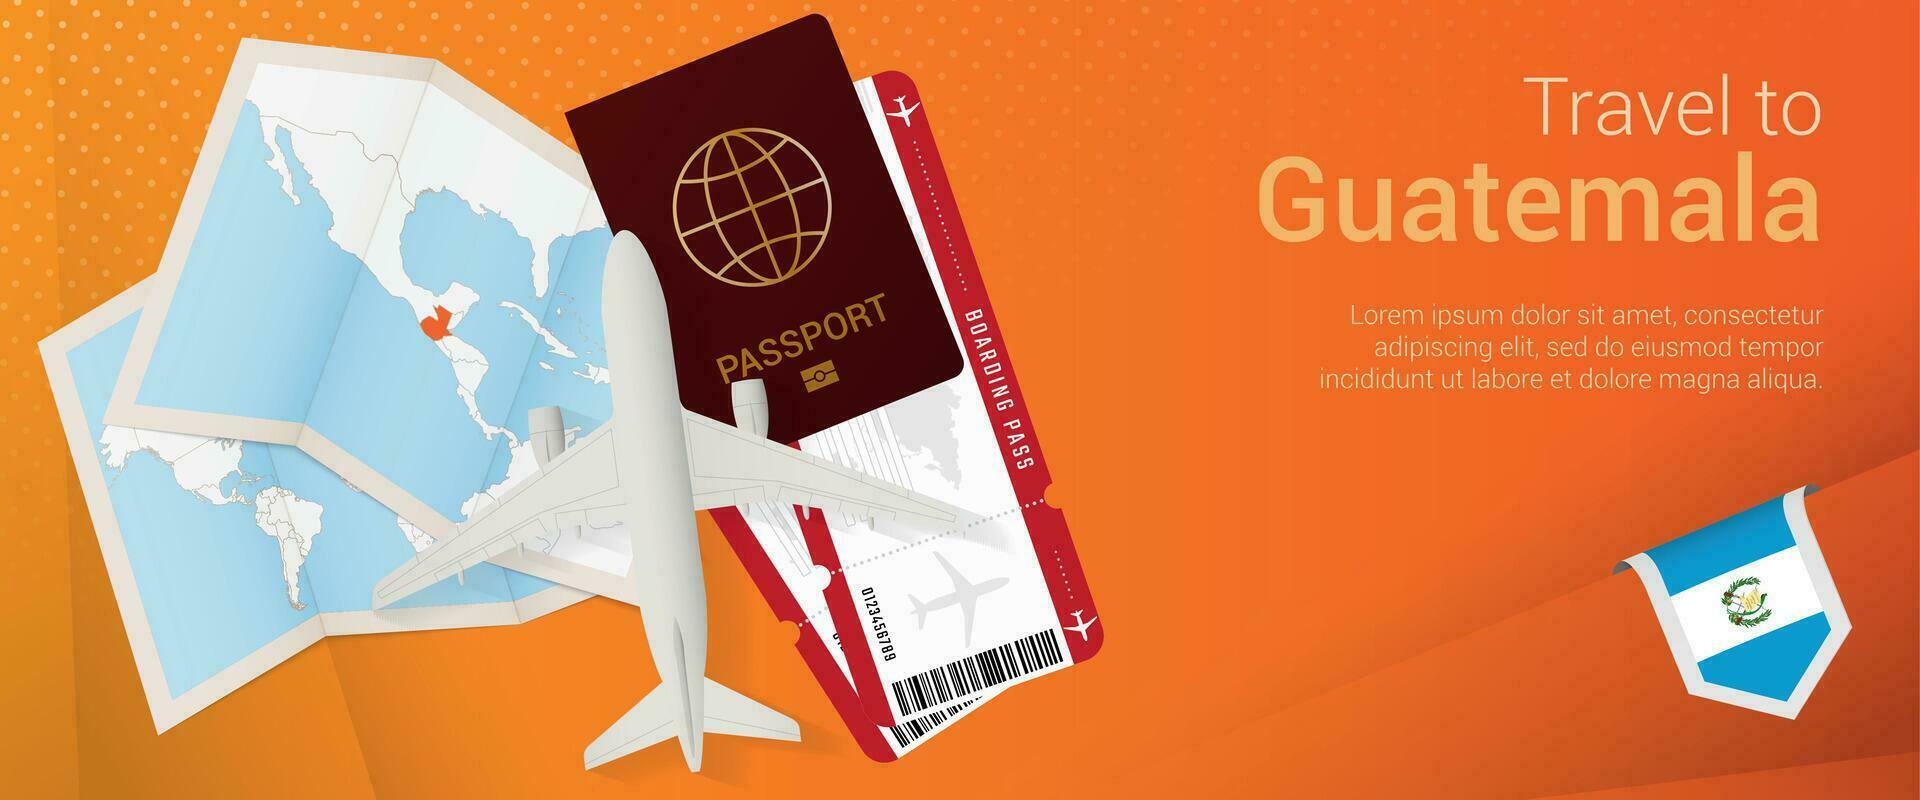 Travel to Guatemala pop-under banner. Trip banner with passport, tickets, airplane, boarding pass, map and flag of Guatemala. vector